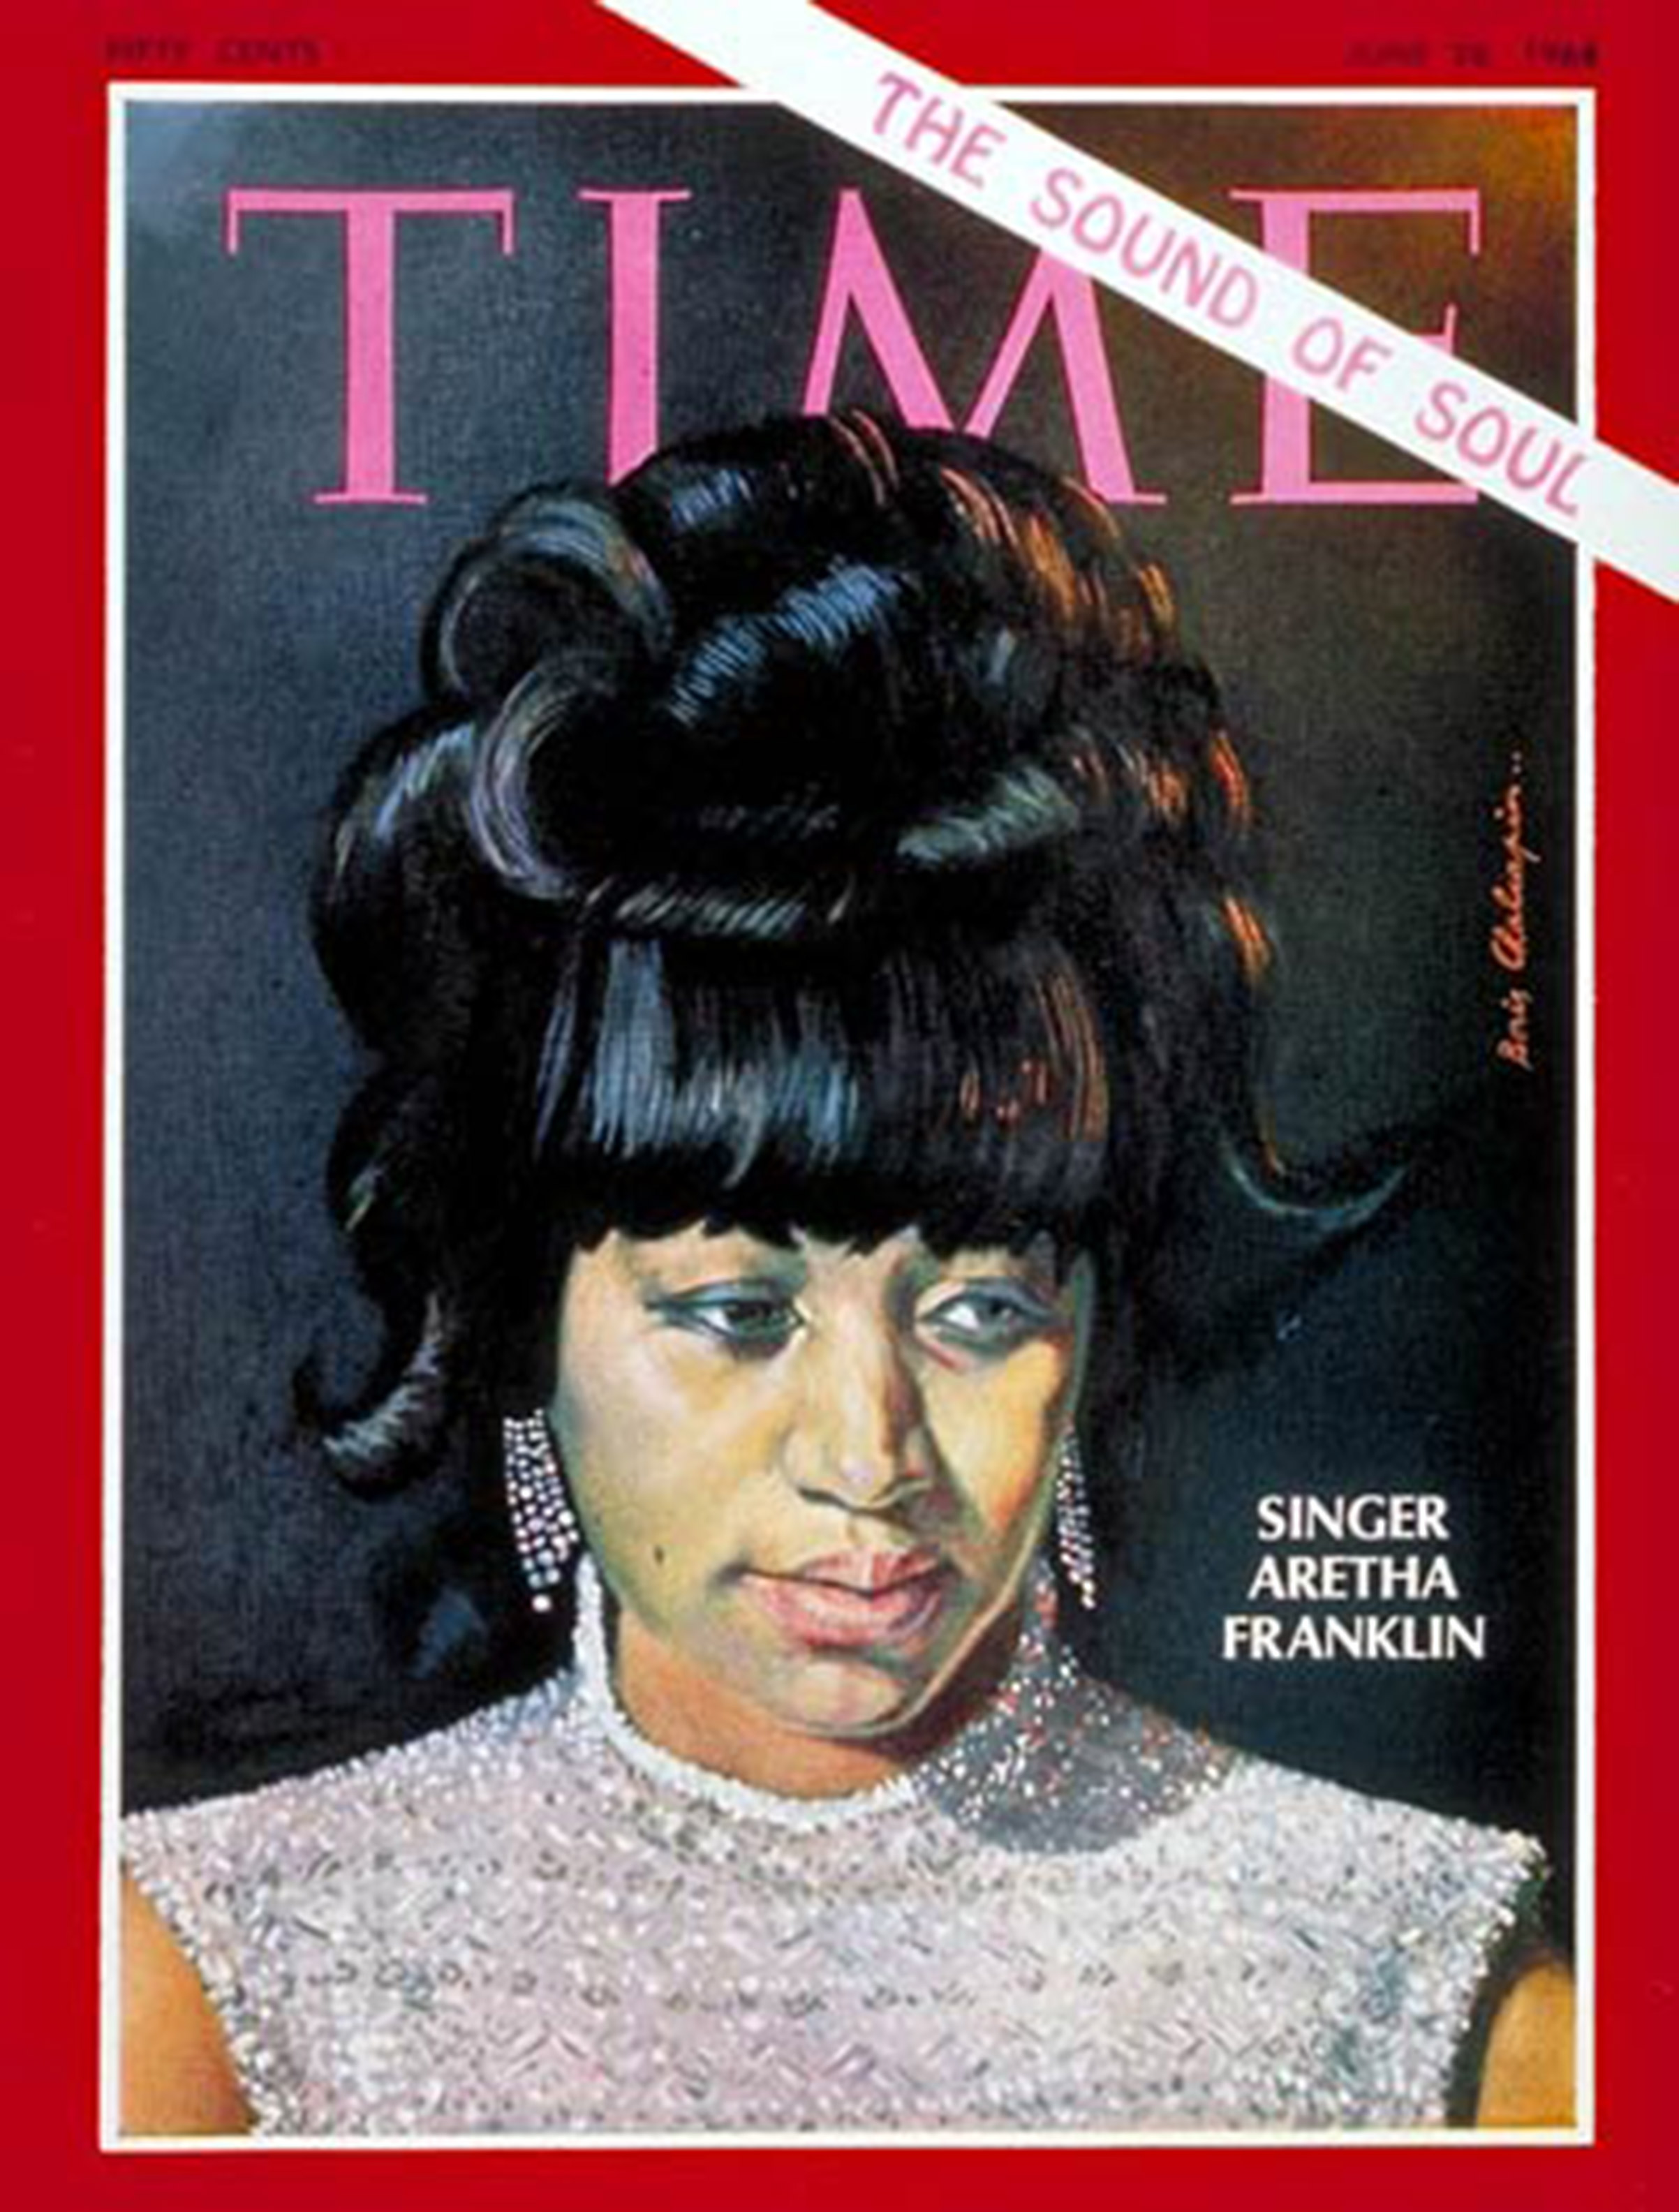 Aretha Franklin on the cover of the June 28, 1968, issue of TIME. (Boris Chaliapin)